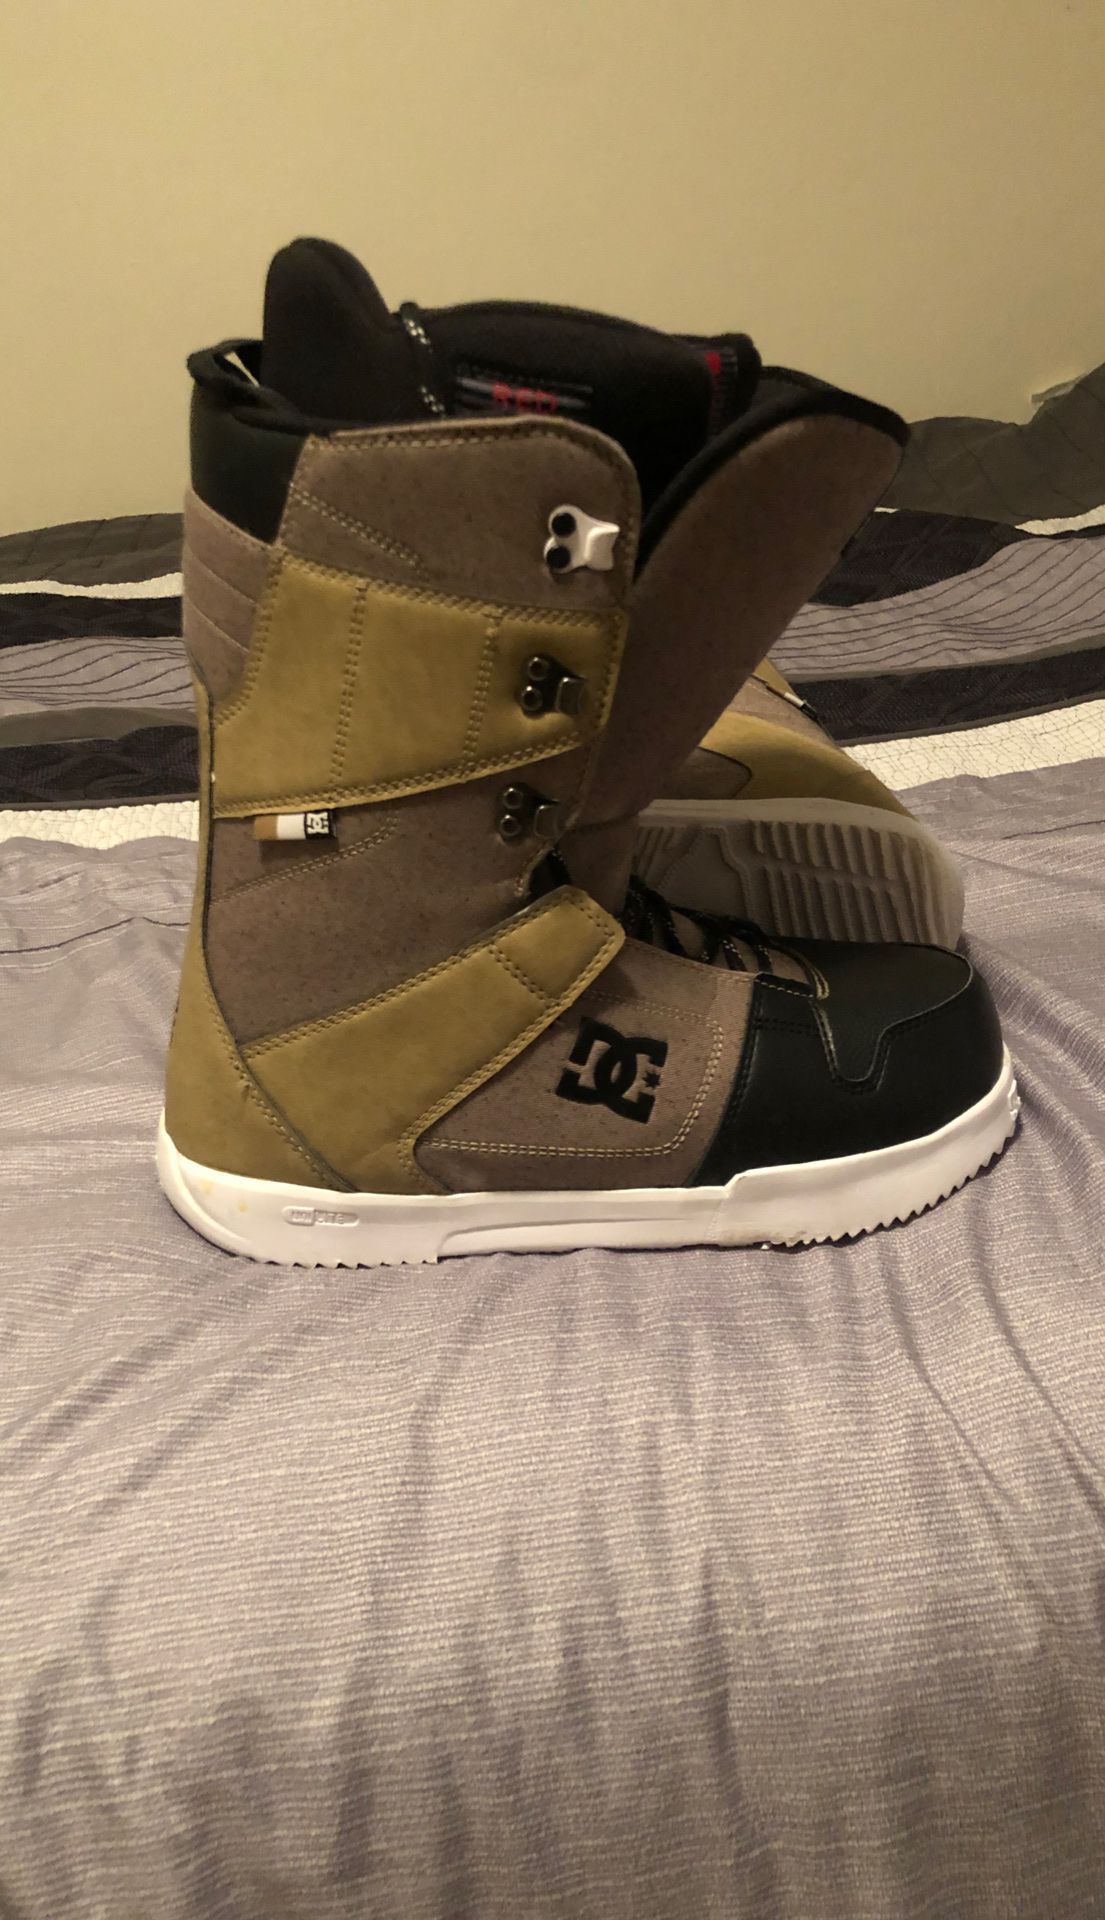 DC snowboard boots